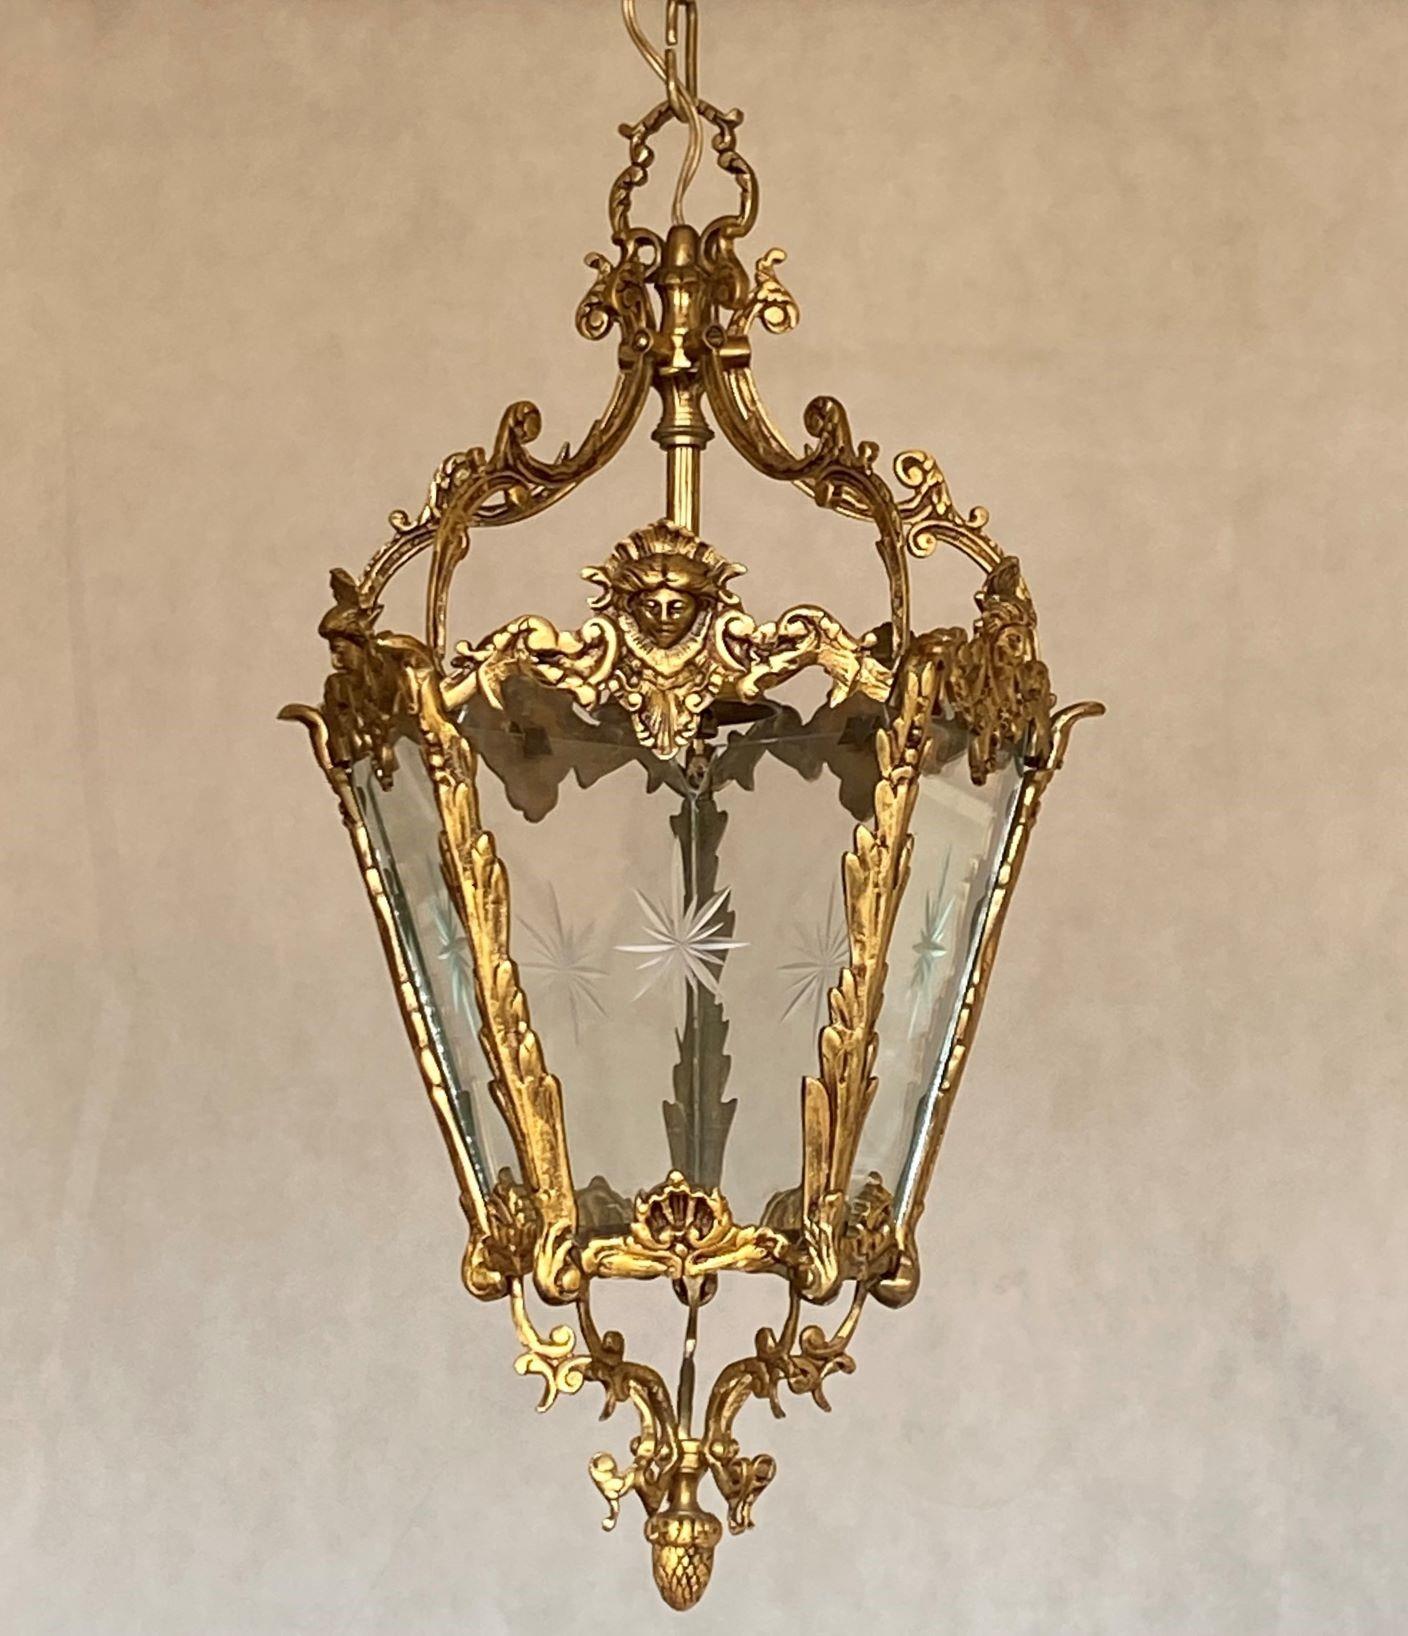 A lovely French Art Deco period bronze and cut glass hall lantern, France, 1910-1920. Bronze beautifully decorated with faces, five glass panels with a cut star design. The lantern is in very good, condition, aged patina to bronze, rewired
With a